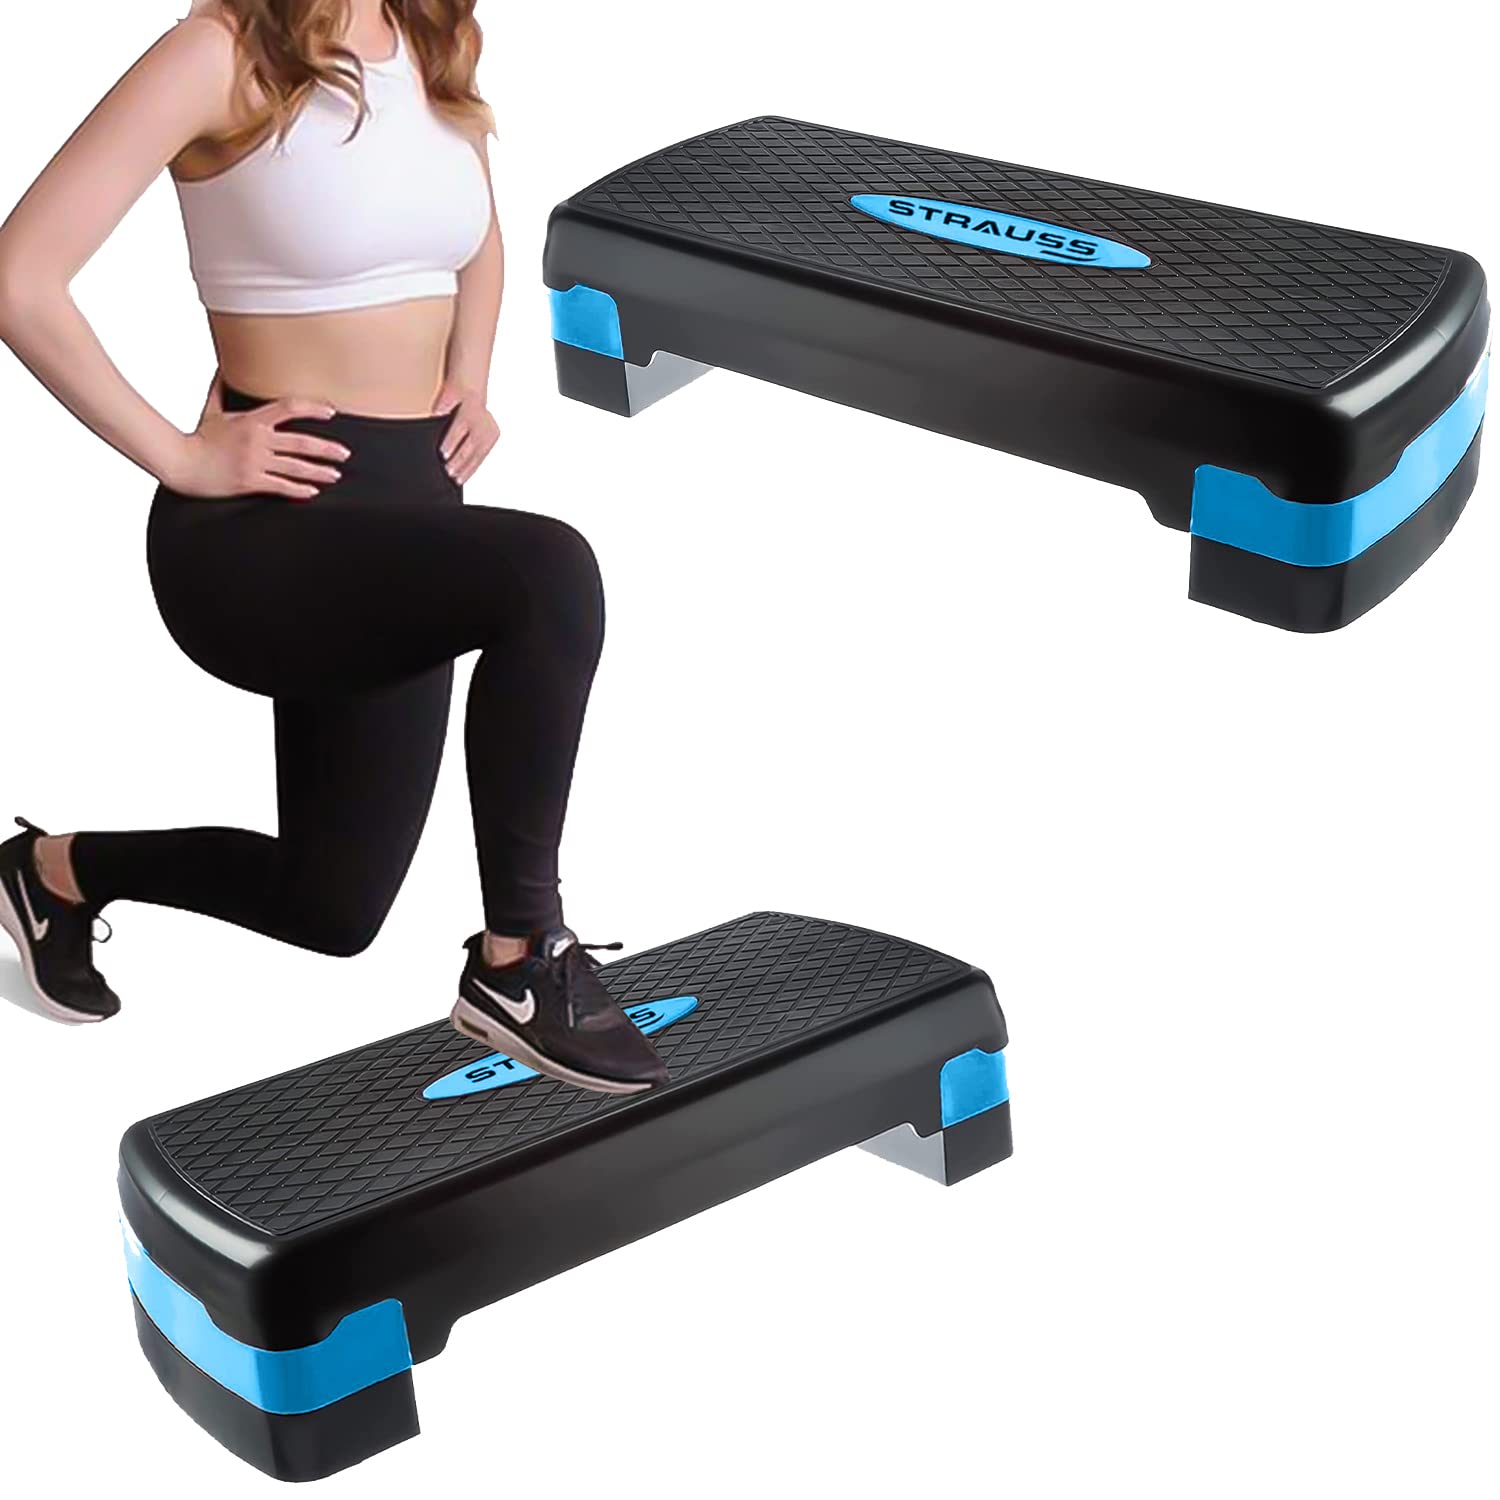 Strauss Aerobic Stepper | Two Height Level Adjustments - 4 inches and 6 inches | Slip-Resistant & Shock Absorbing Platform for Extra-Durability - Supports Upto 200 KG, (Blue)